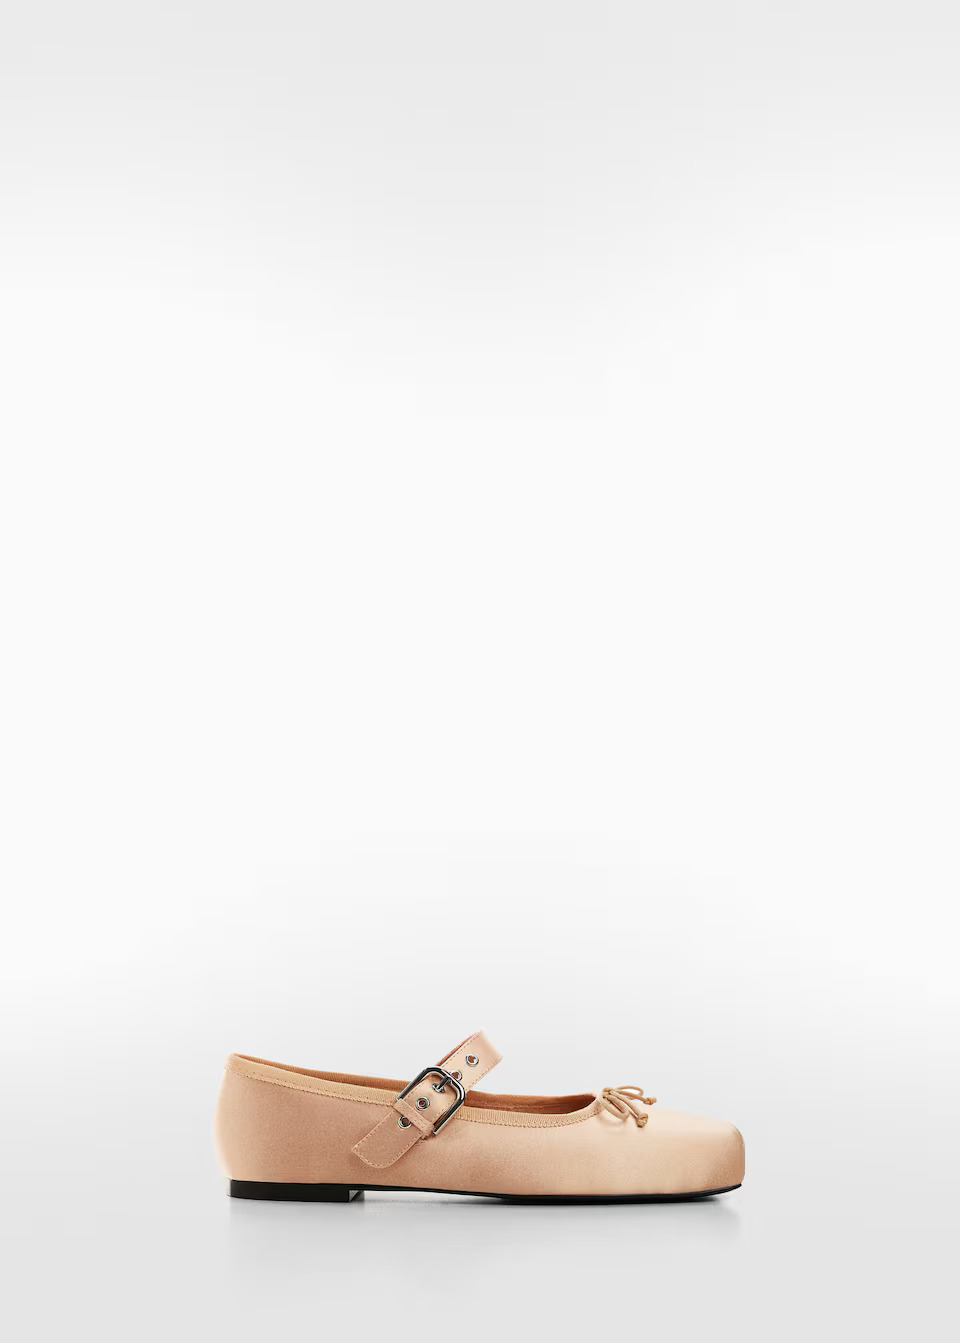 mango beige satin Mary Jane flats with a buckle strap